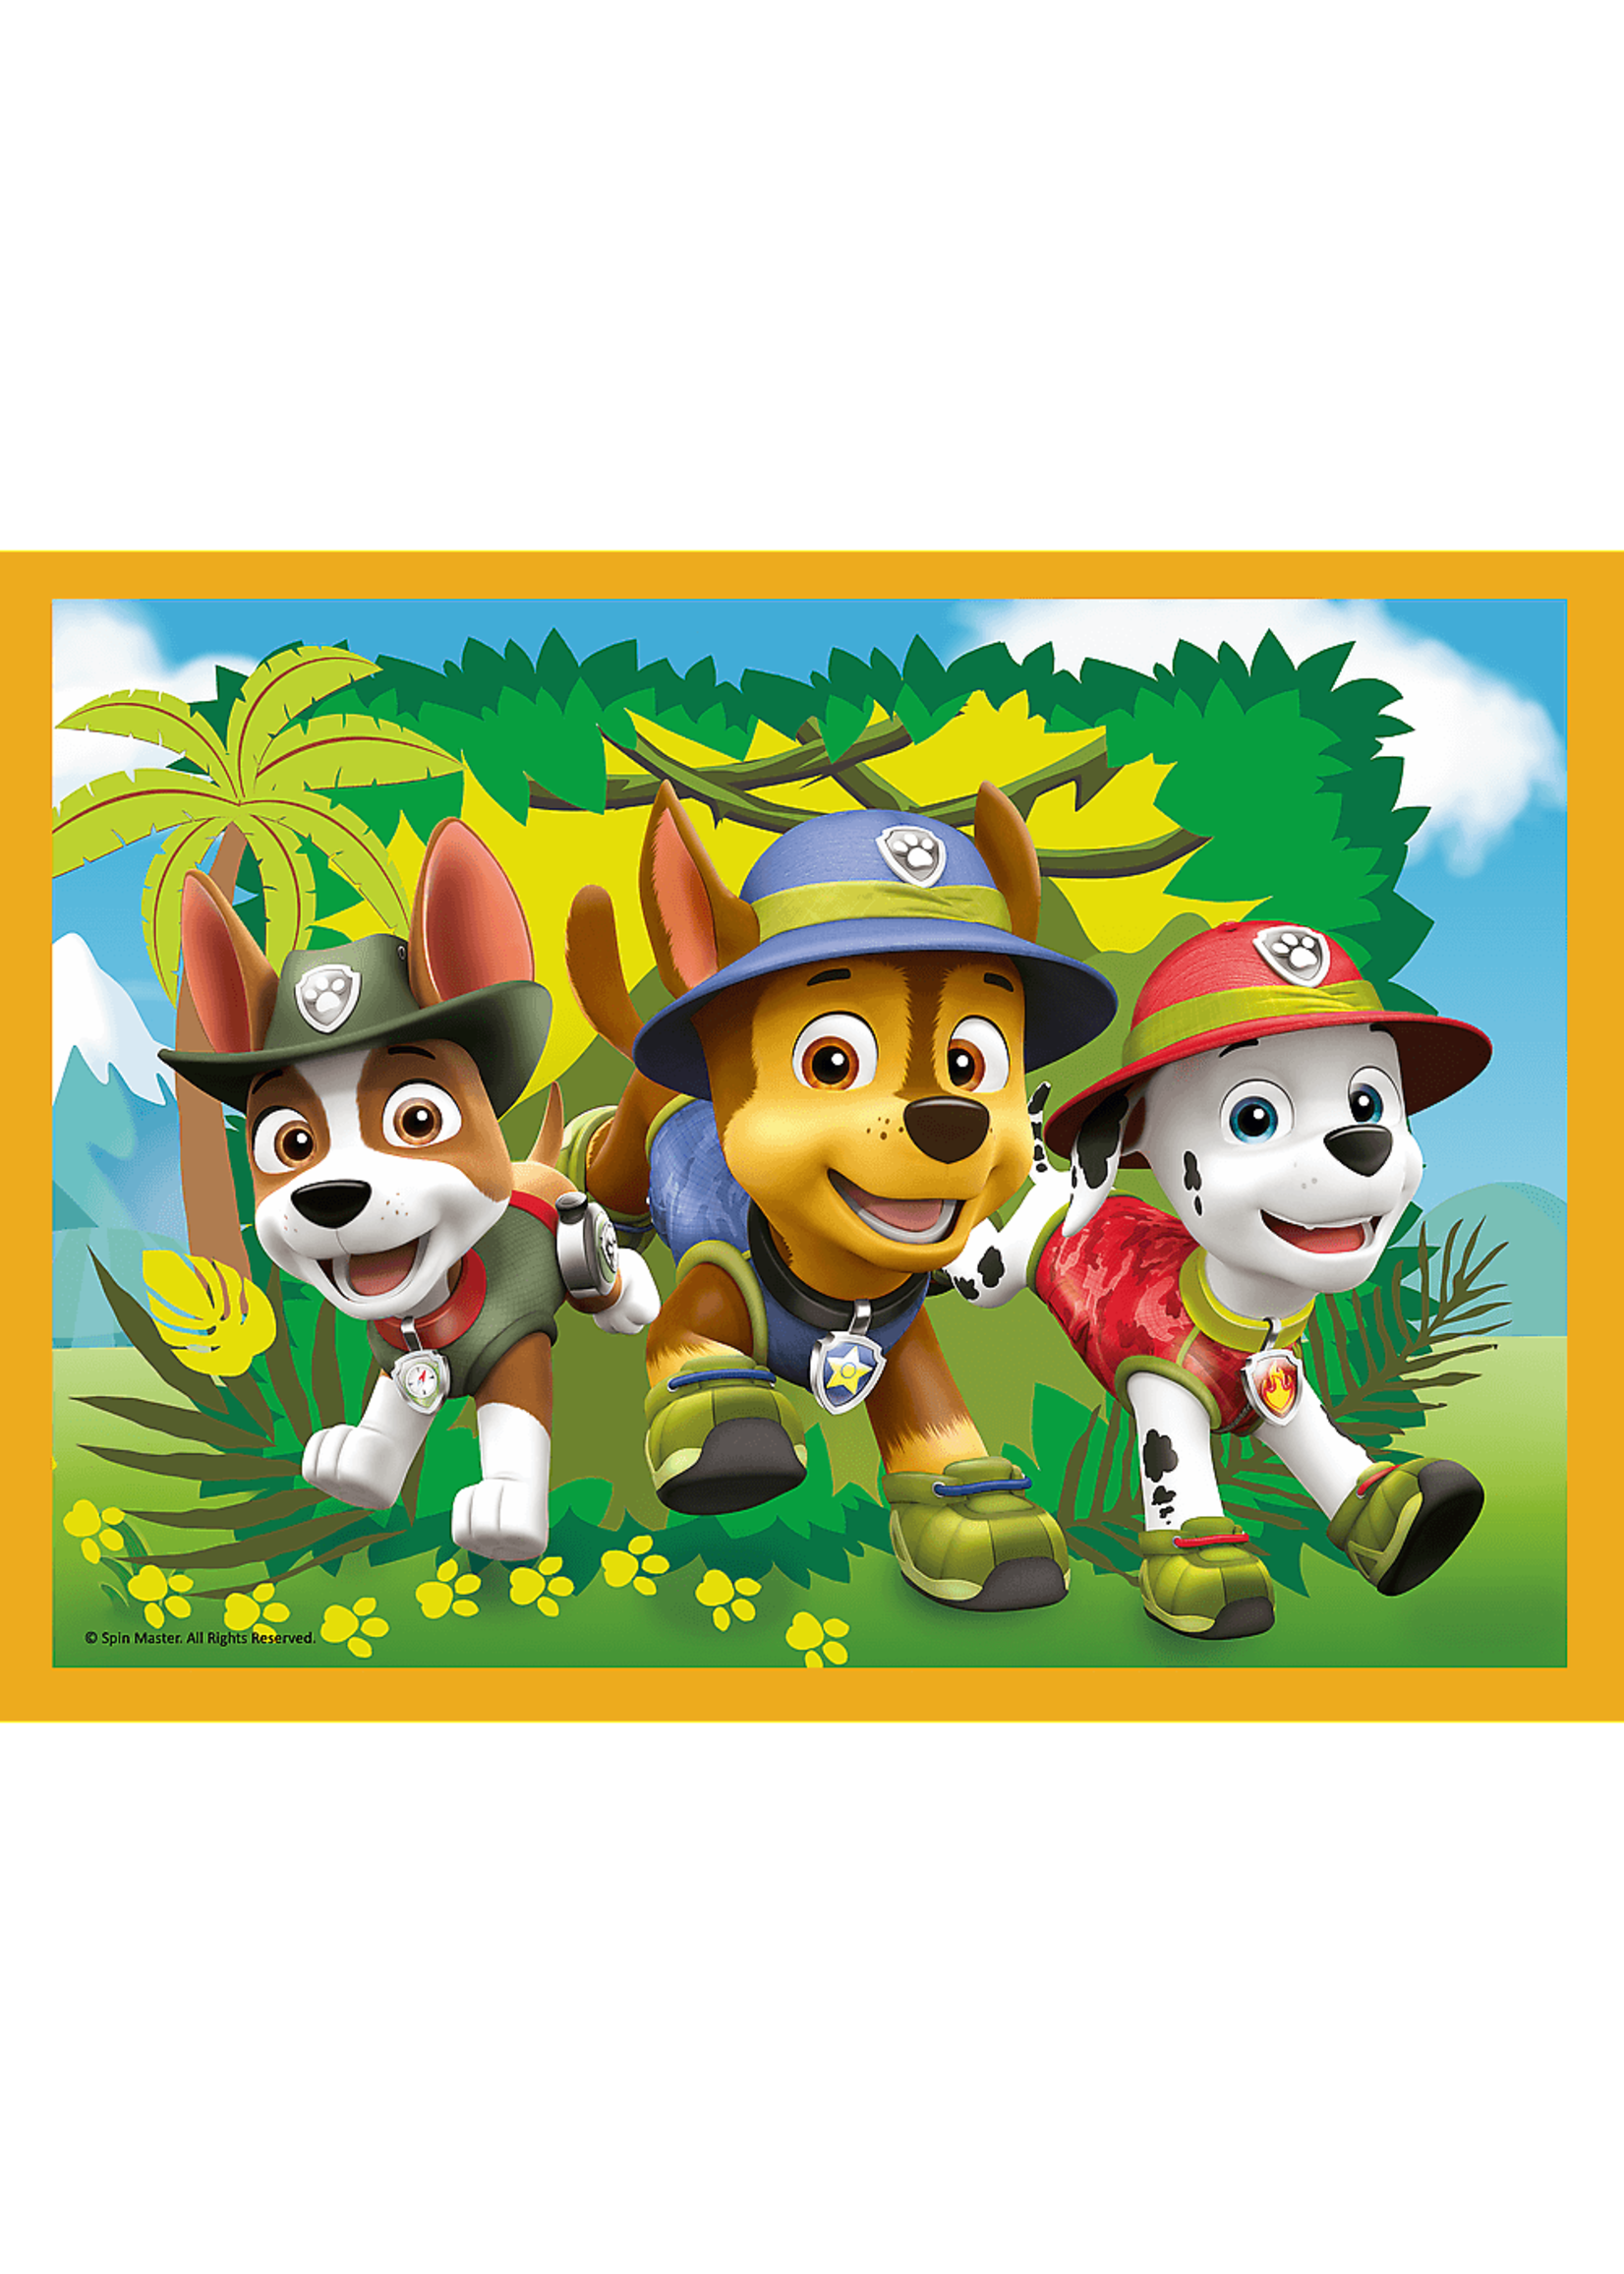 Nickelodeon Paw Patrol 4 in 1 puzzle from Nickelodeon